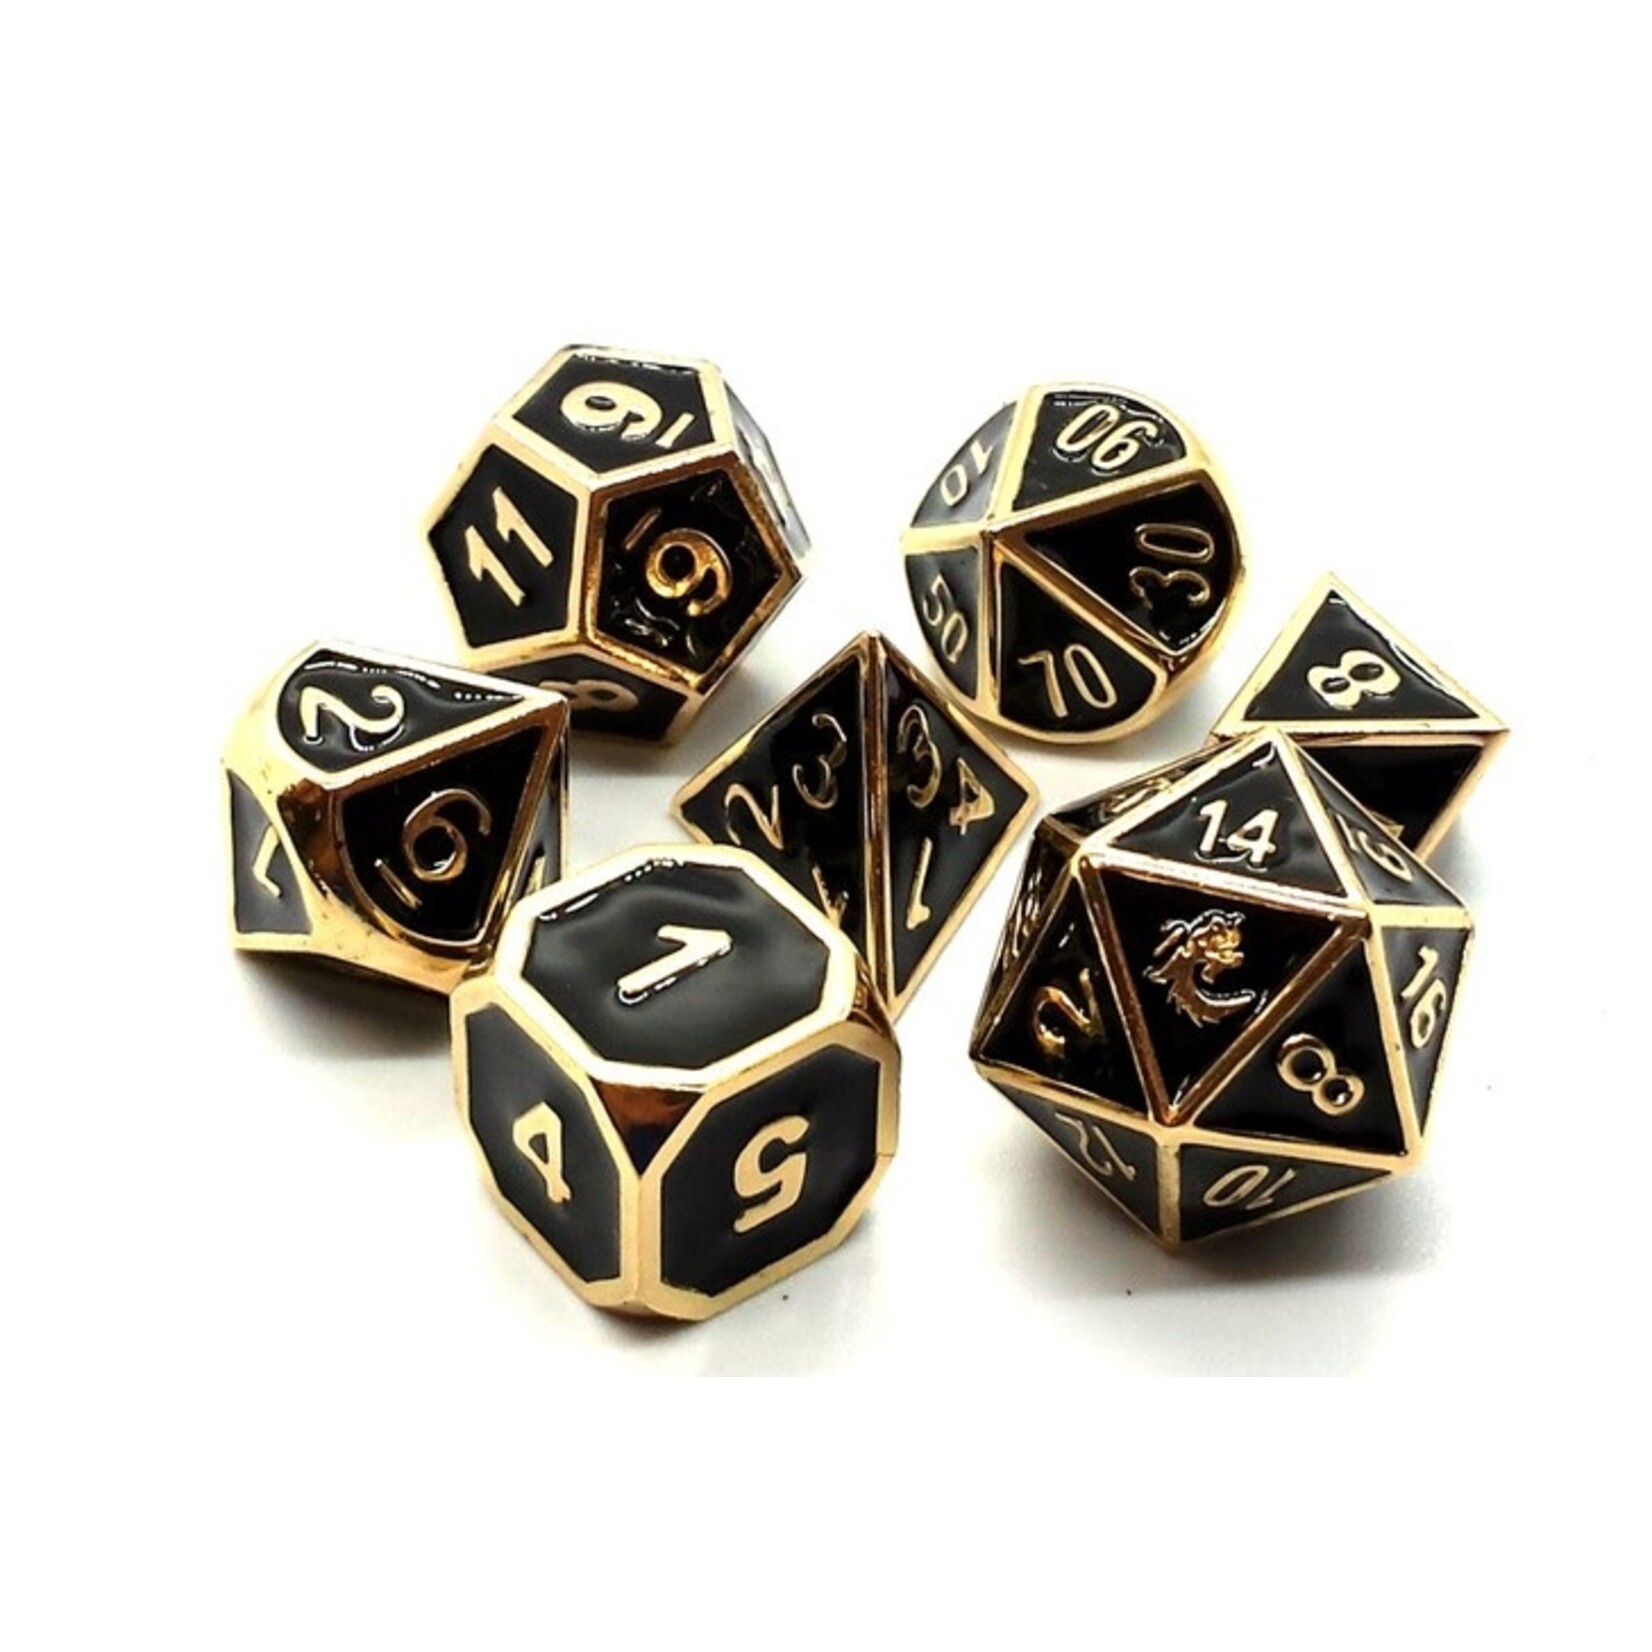 Old School Dice Old School 7 Piece DnD RPG Metal Dice Set: Elven Forged - Black w/ Gold